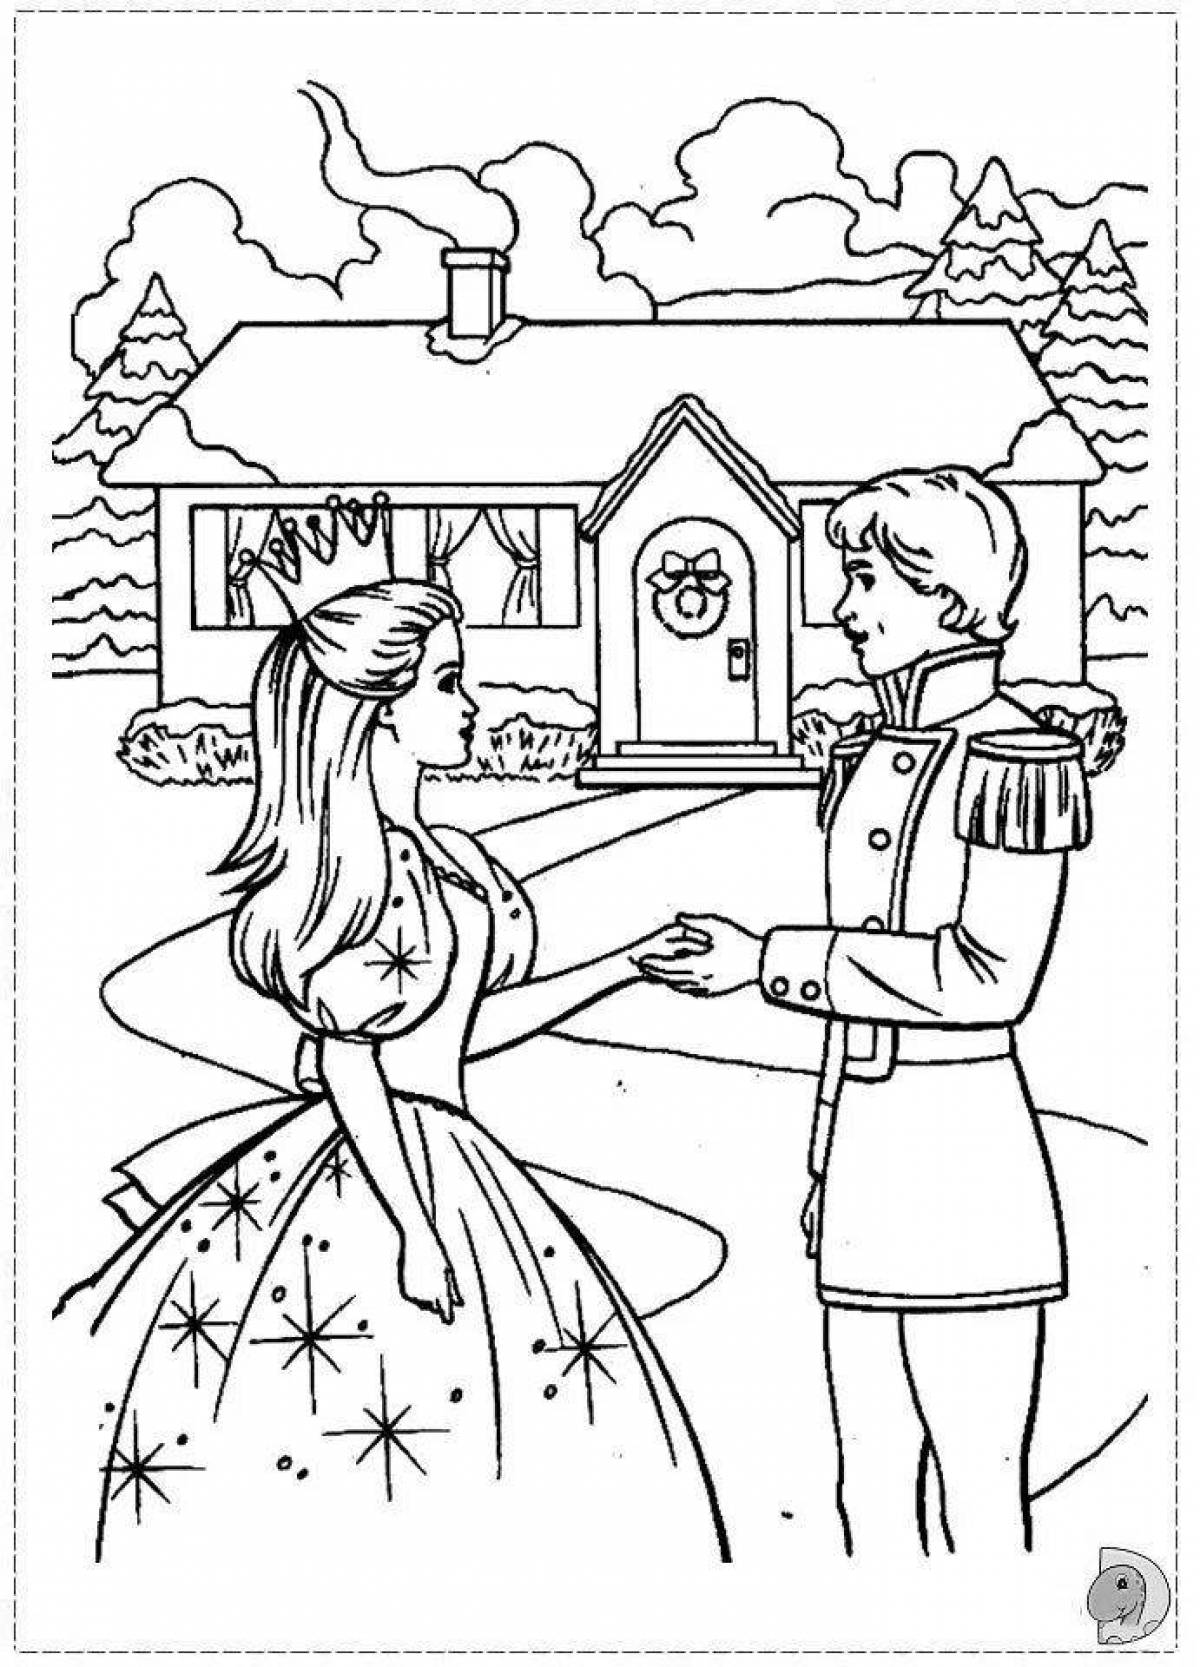 Coloring page happy nutcracker and mouse king